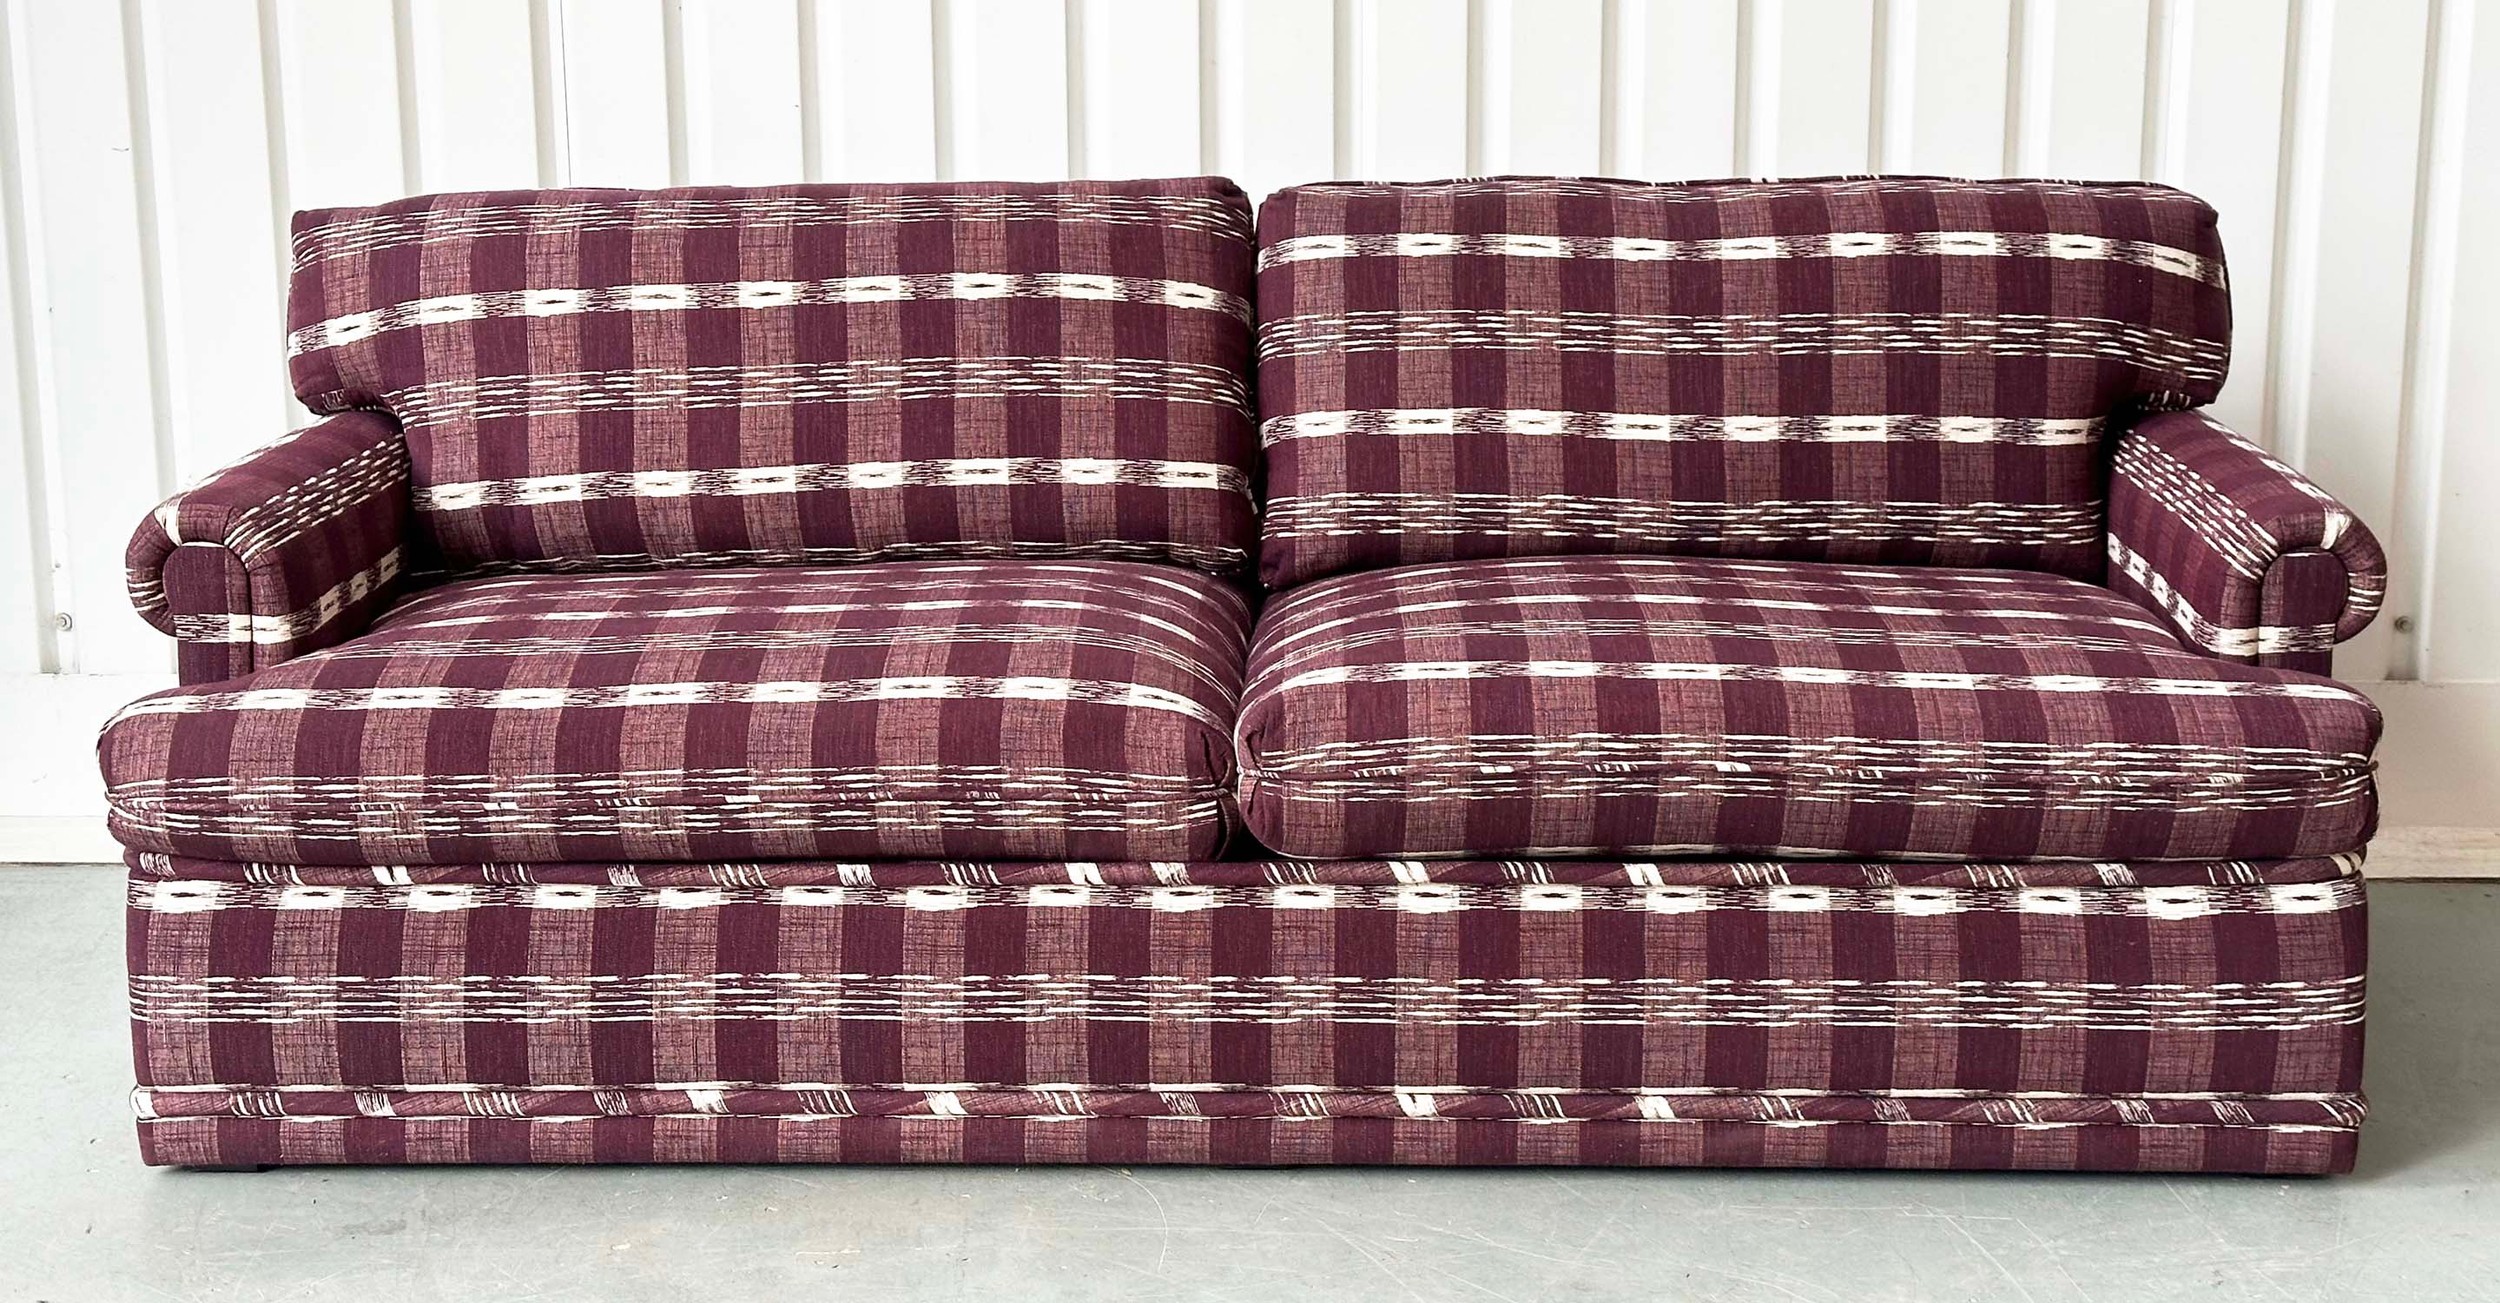 SOFA, Swedish check purple/white upholstery with scroll arms, 203cm W. - Image 2 of 18